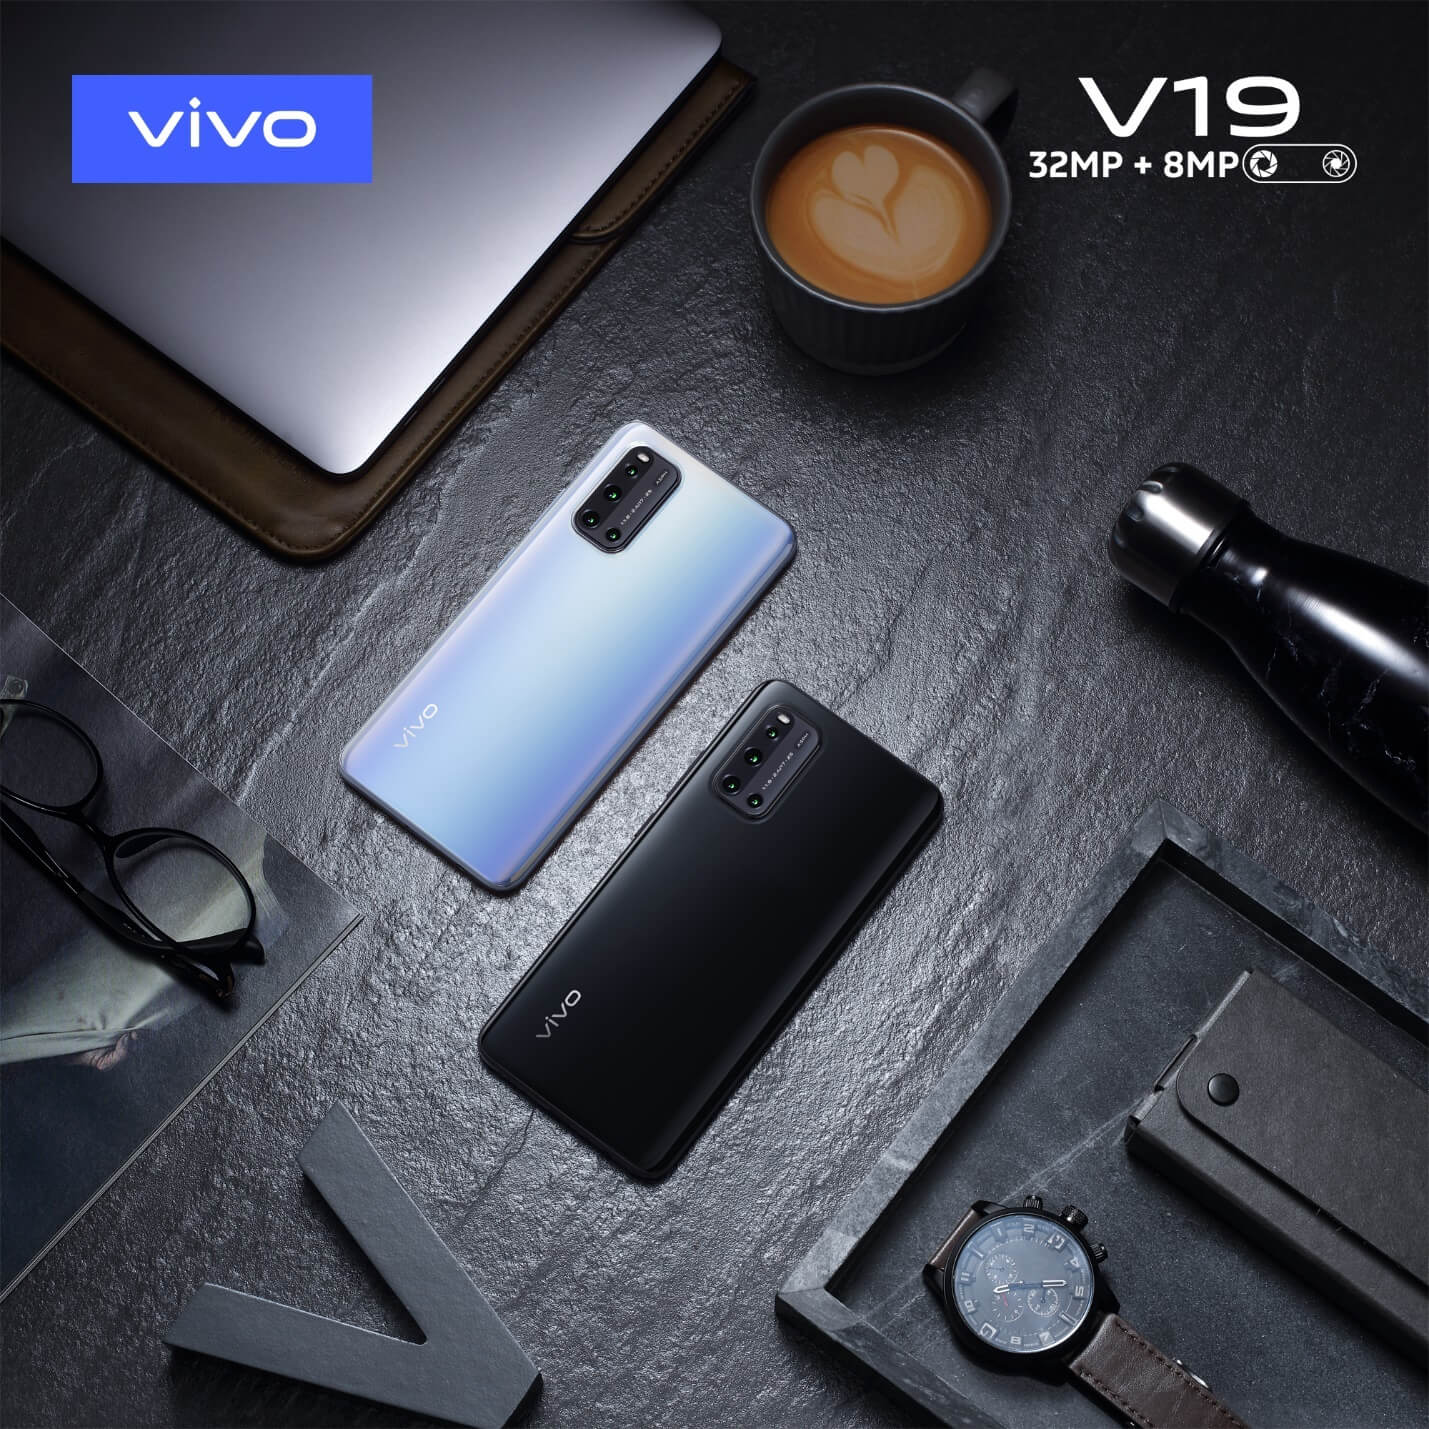 Vivo Invites You to “Take Back the Night” with the New V19 and V19 Neo